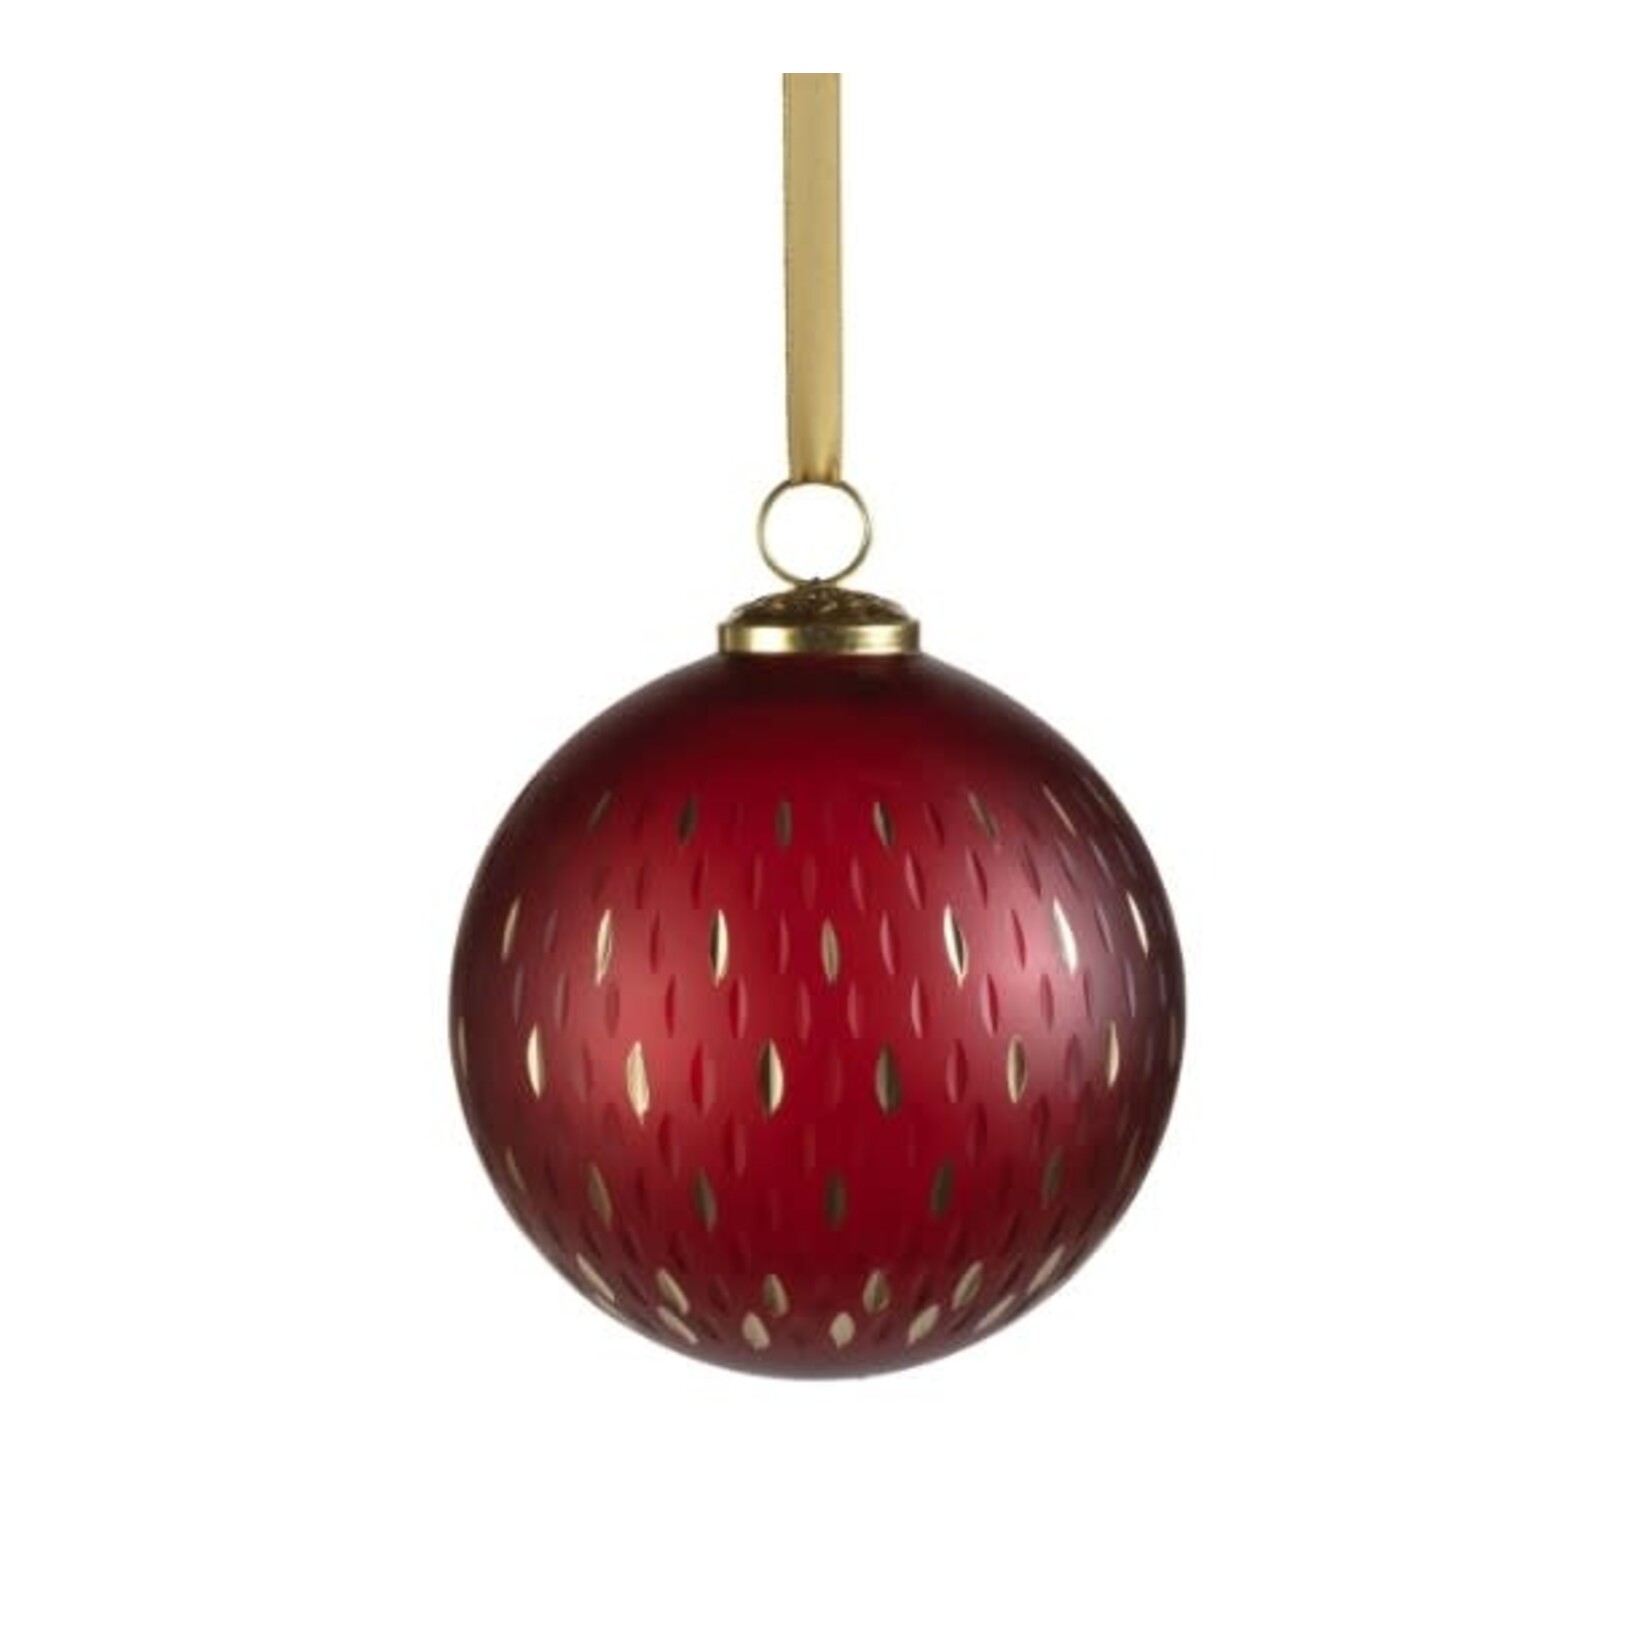 Zodax Frosted & Etched in Gold Glass Ornament Red